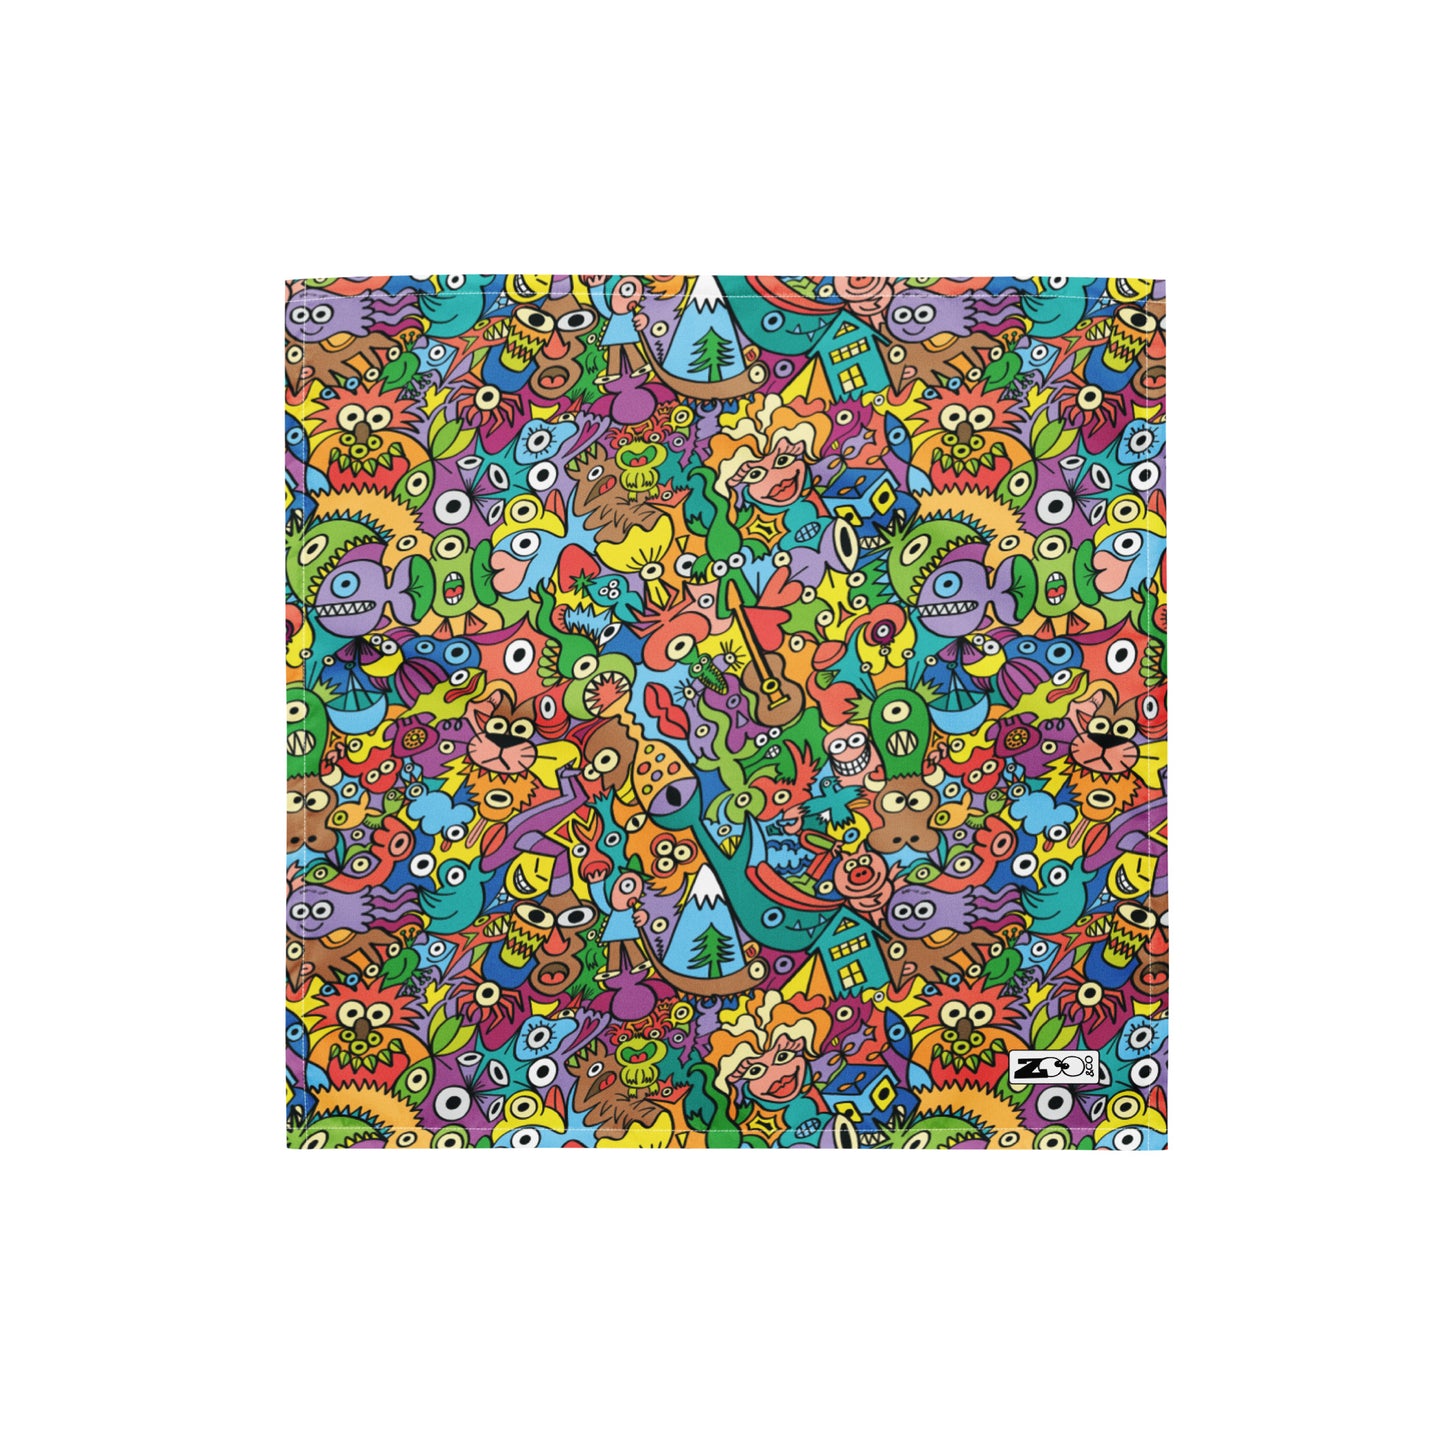 Cheerful crowd enjoying a lively carnival All-over print bandana. Small size